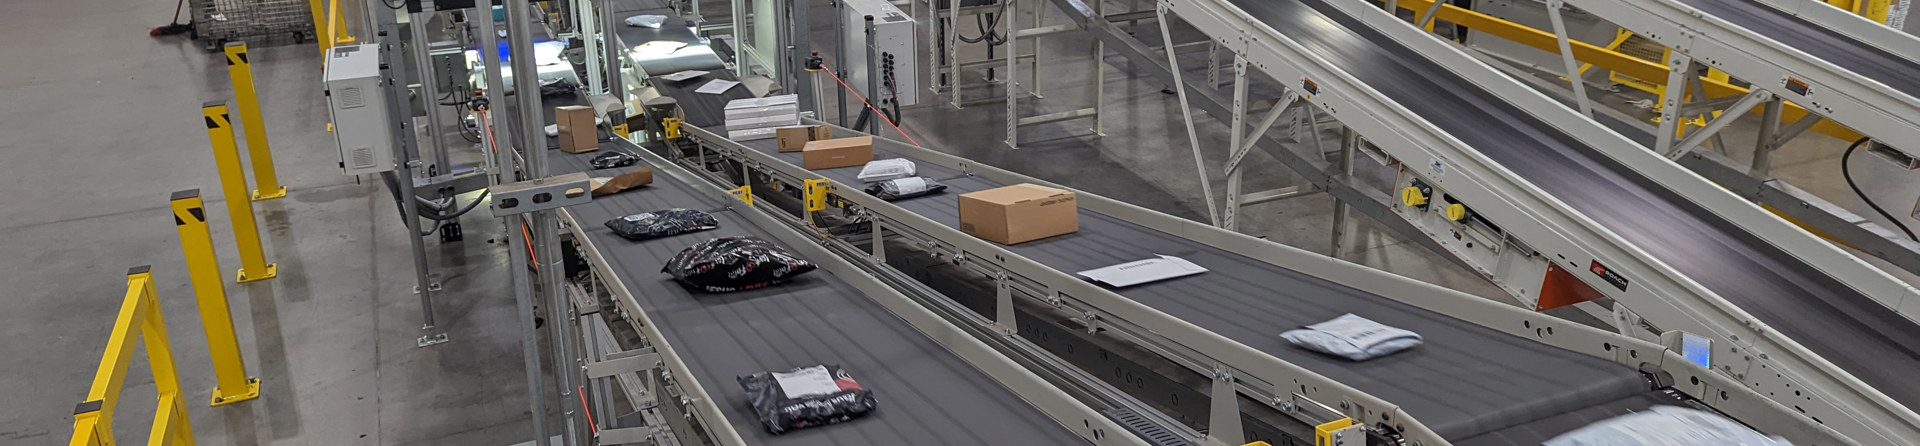 Cargo, post, parcel and warehouse handling systems